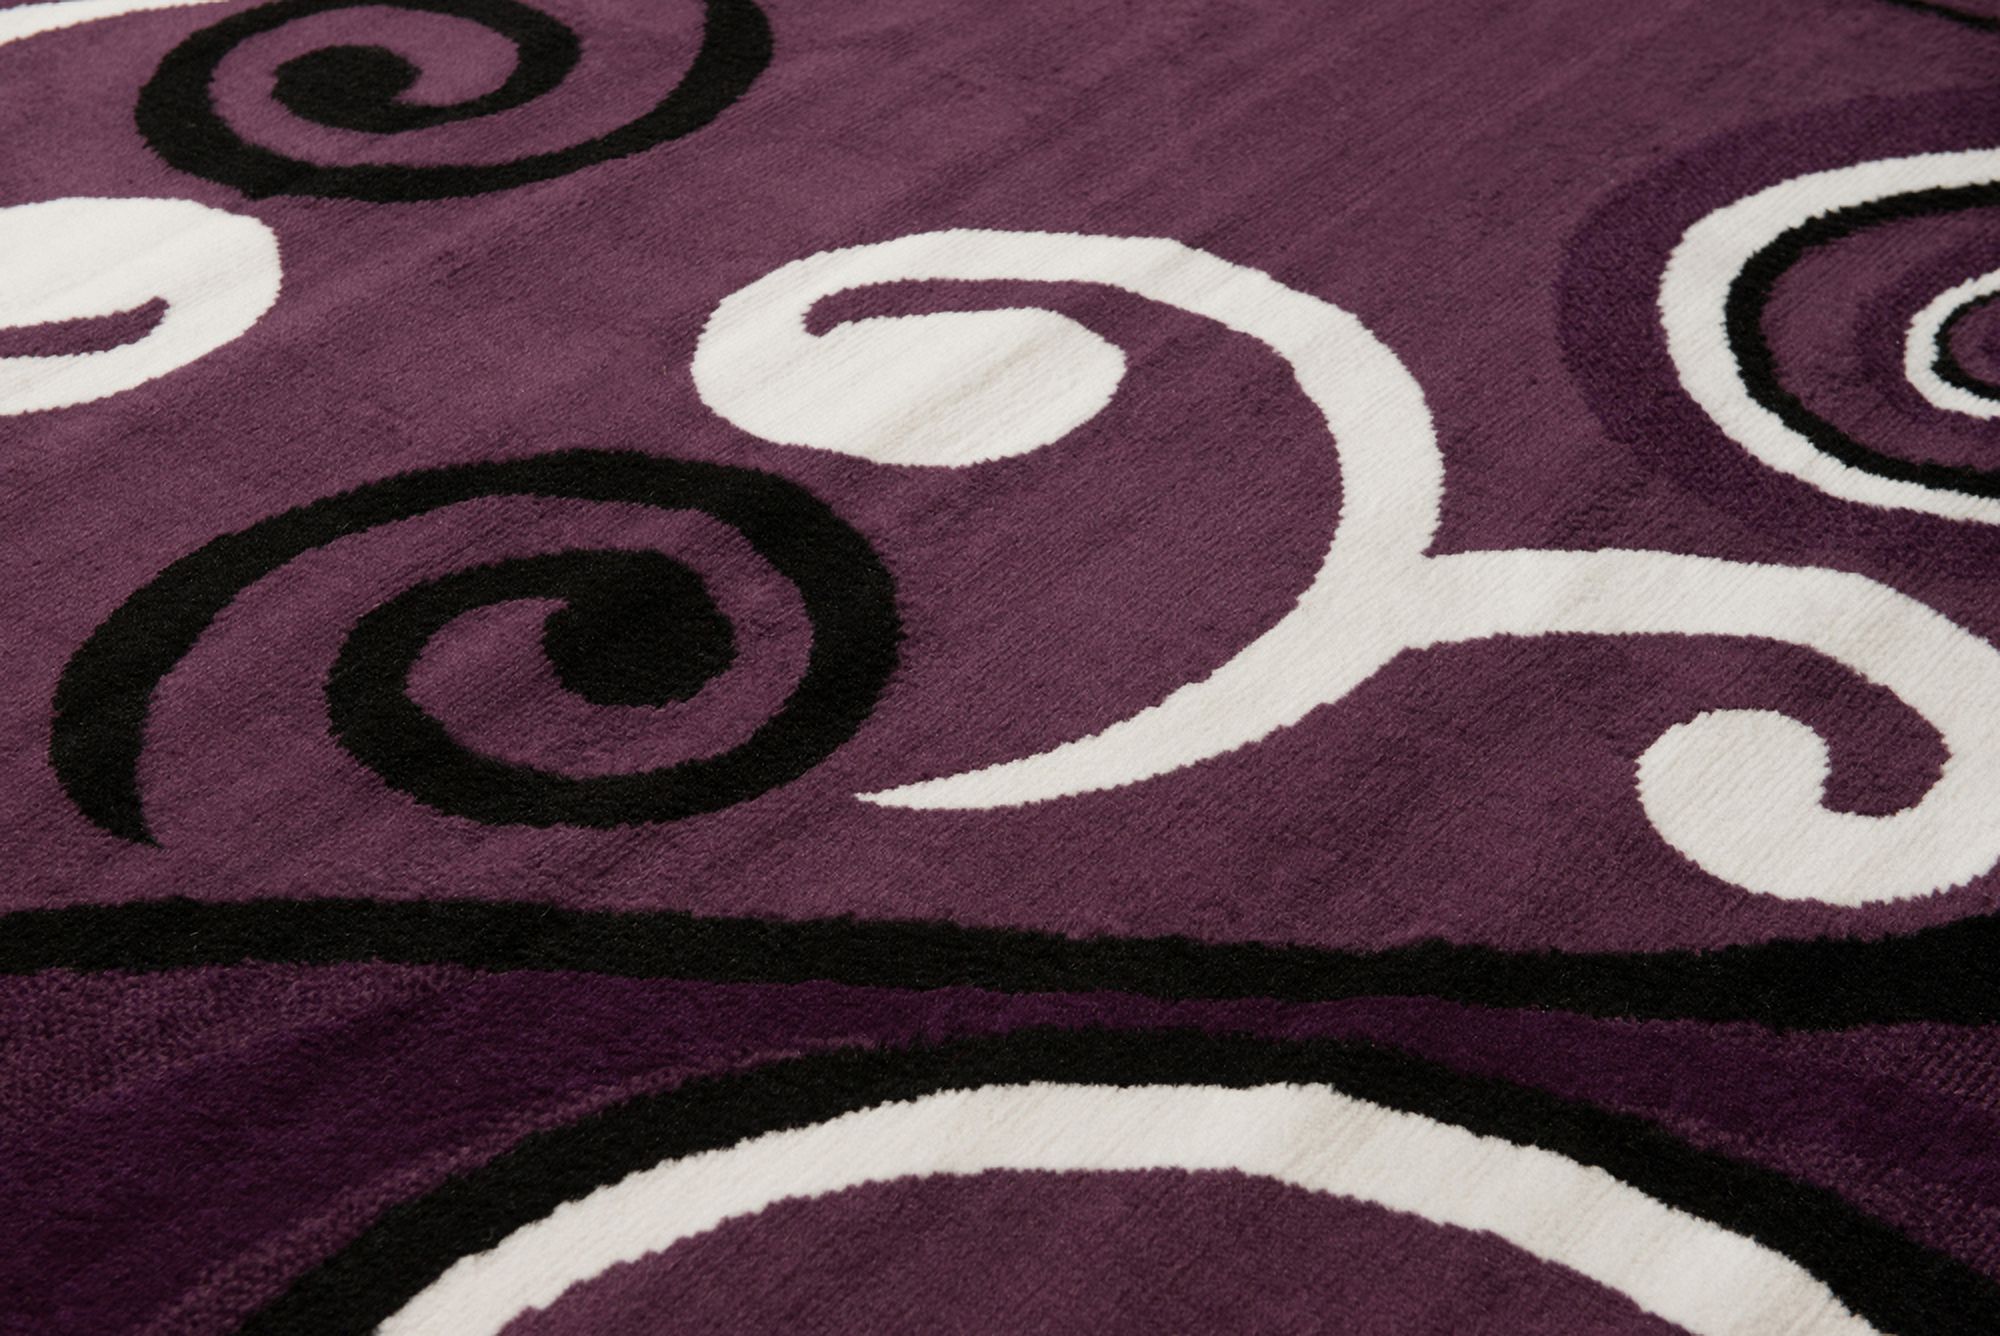 Designer Home Soft Transitional Indoor Modern Area Rug Curvy Swirls  - Actual Size: 1' 11" x  3' 3" Rectangle (Plum) - image 3 of 5